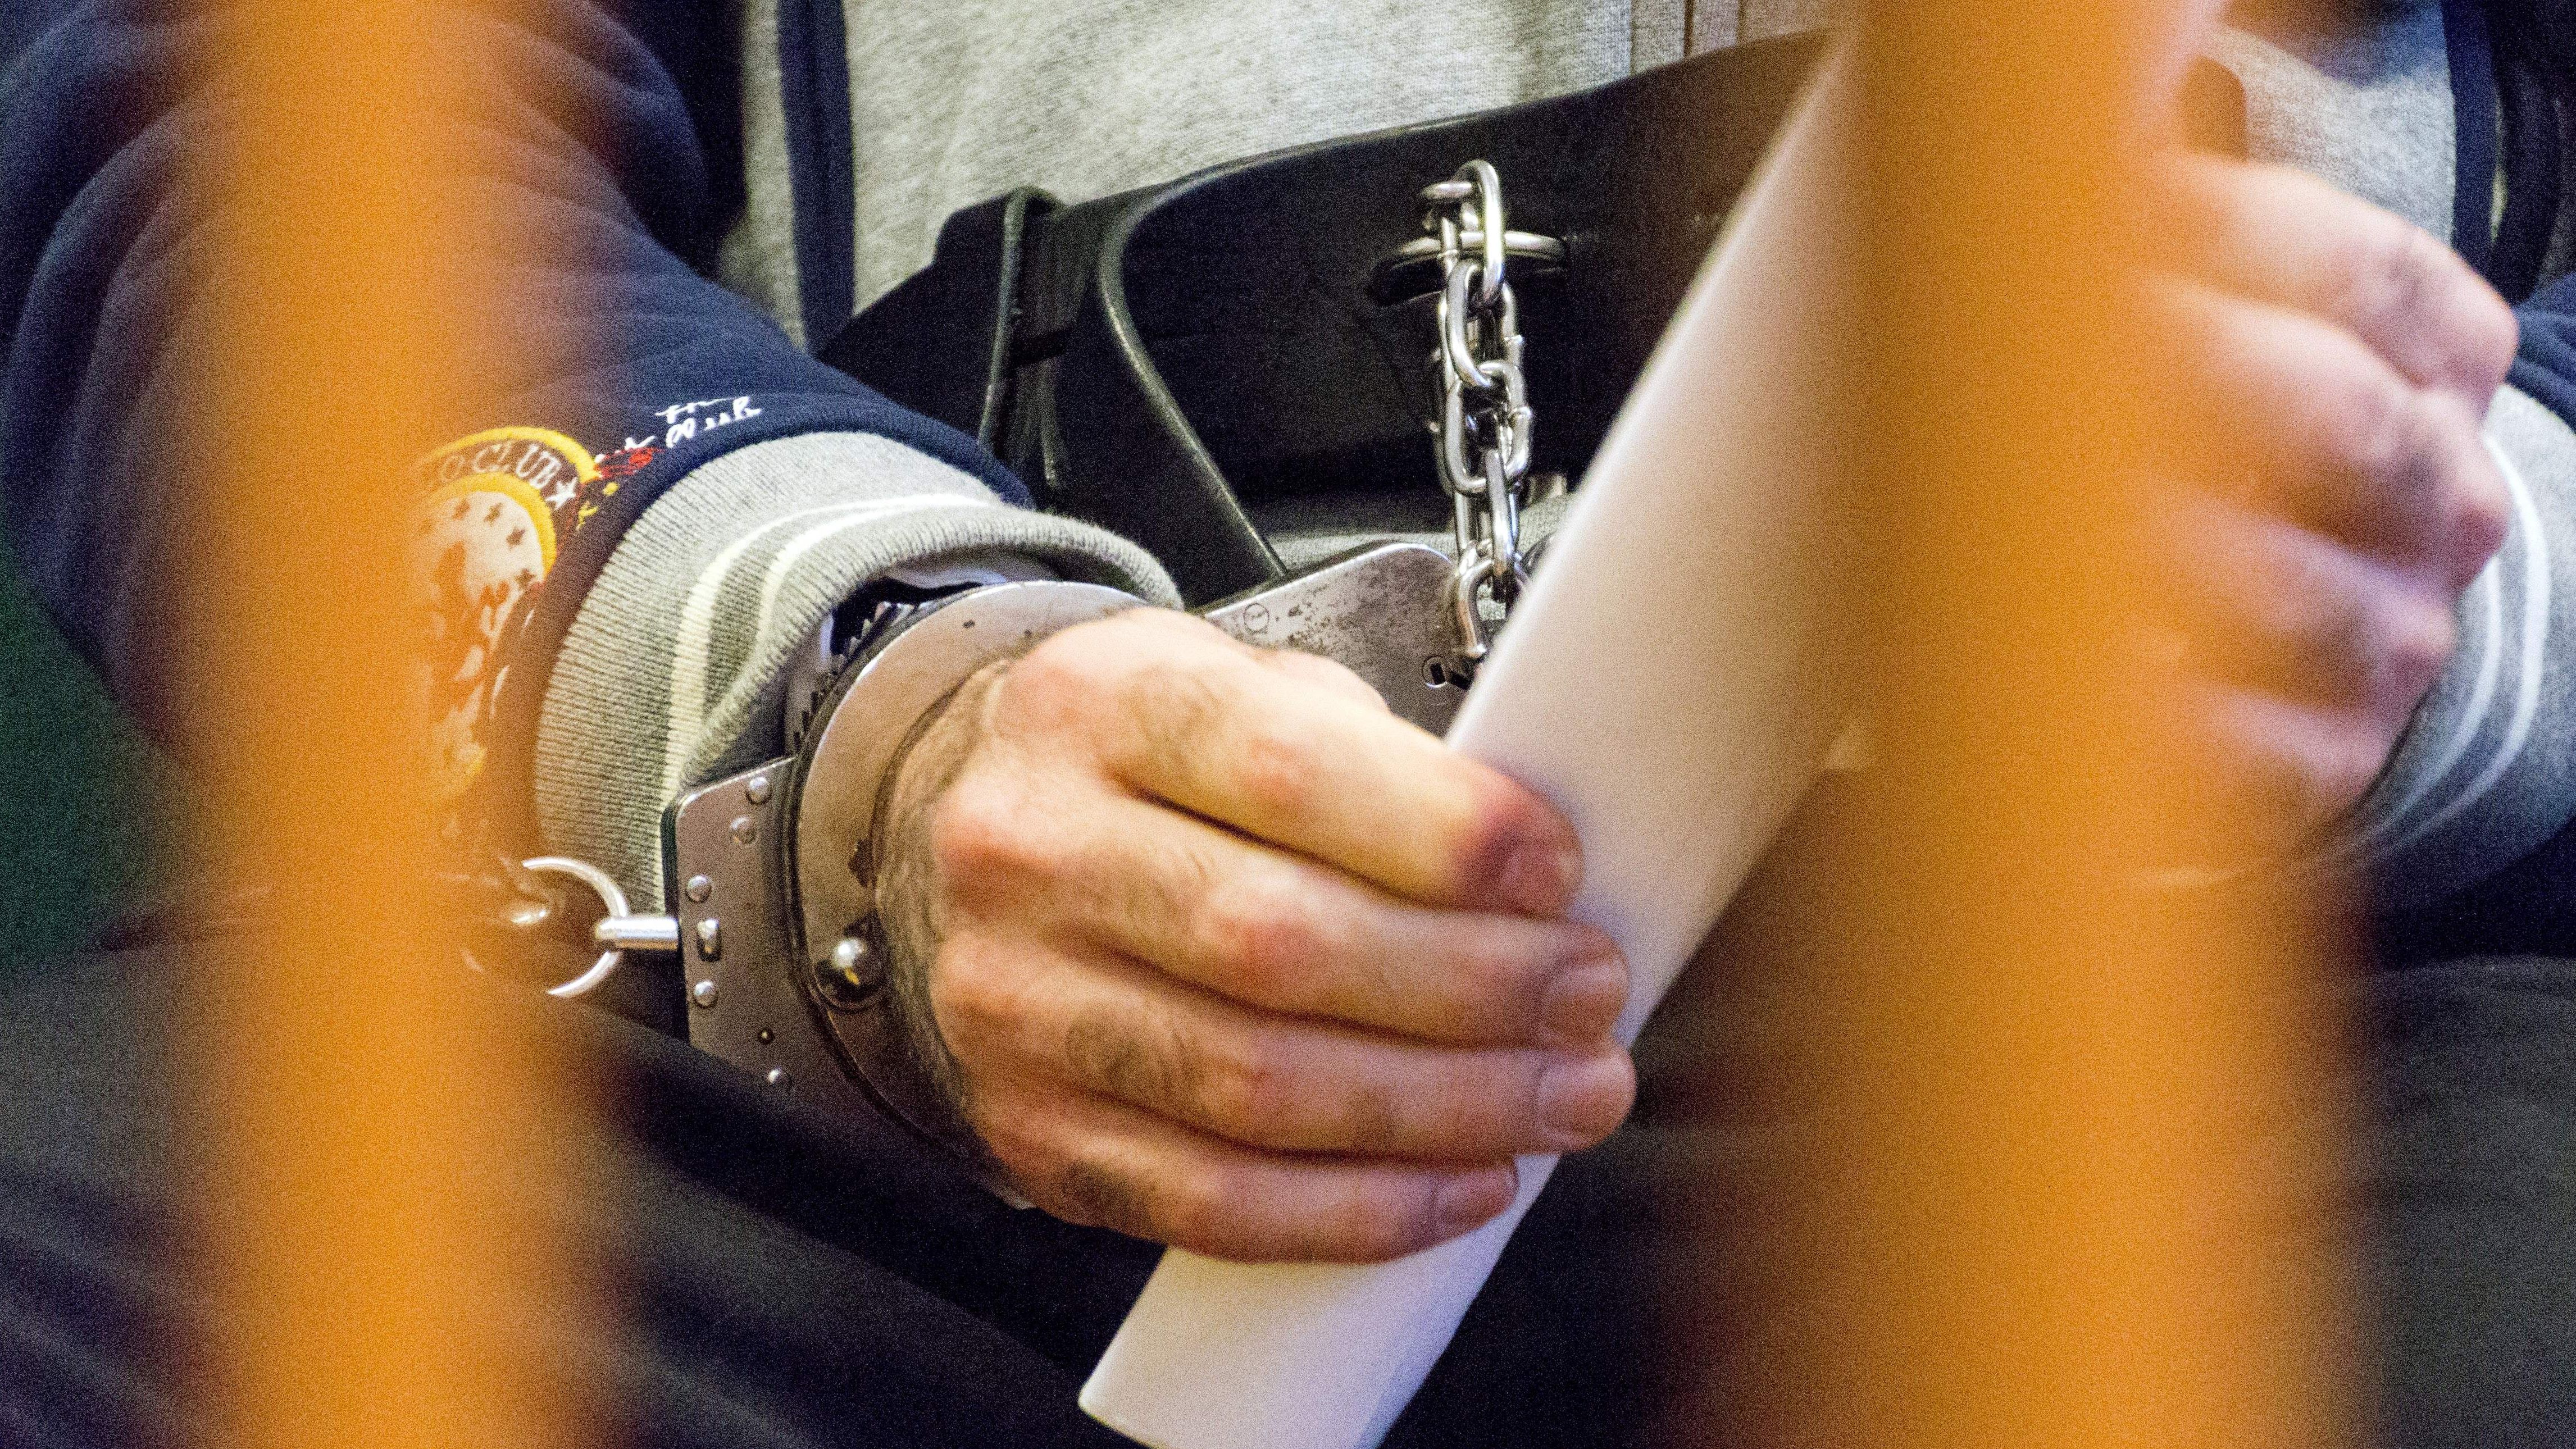 Ahmed H. awaits the verdict in his trial at the court in Szeged, Hungary, on November 30, 2016. 